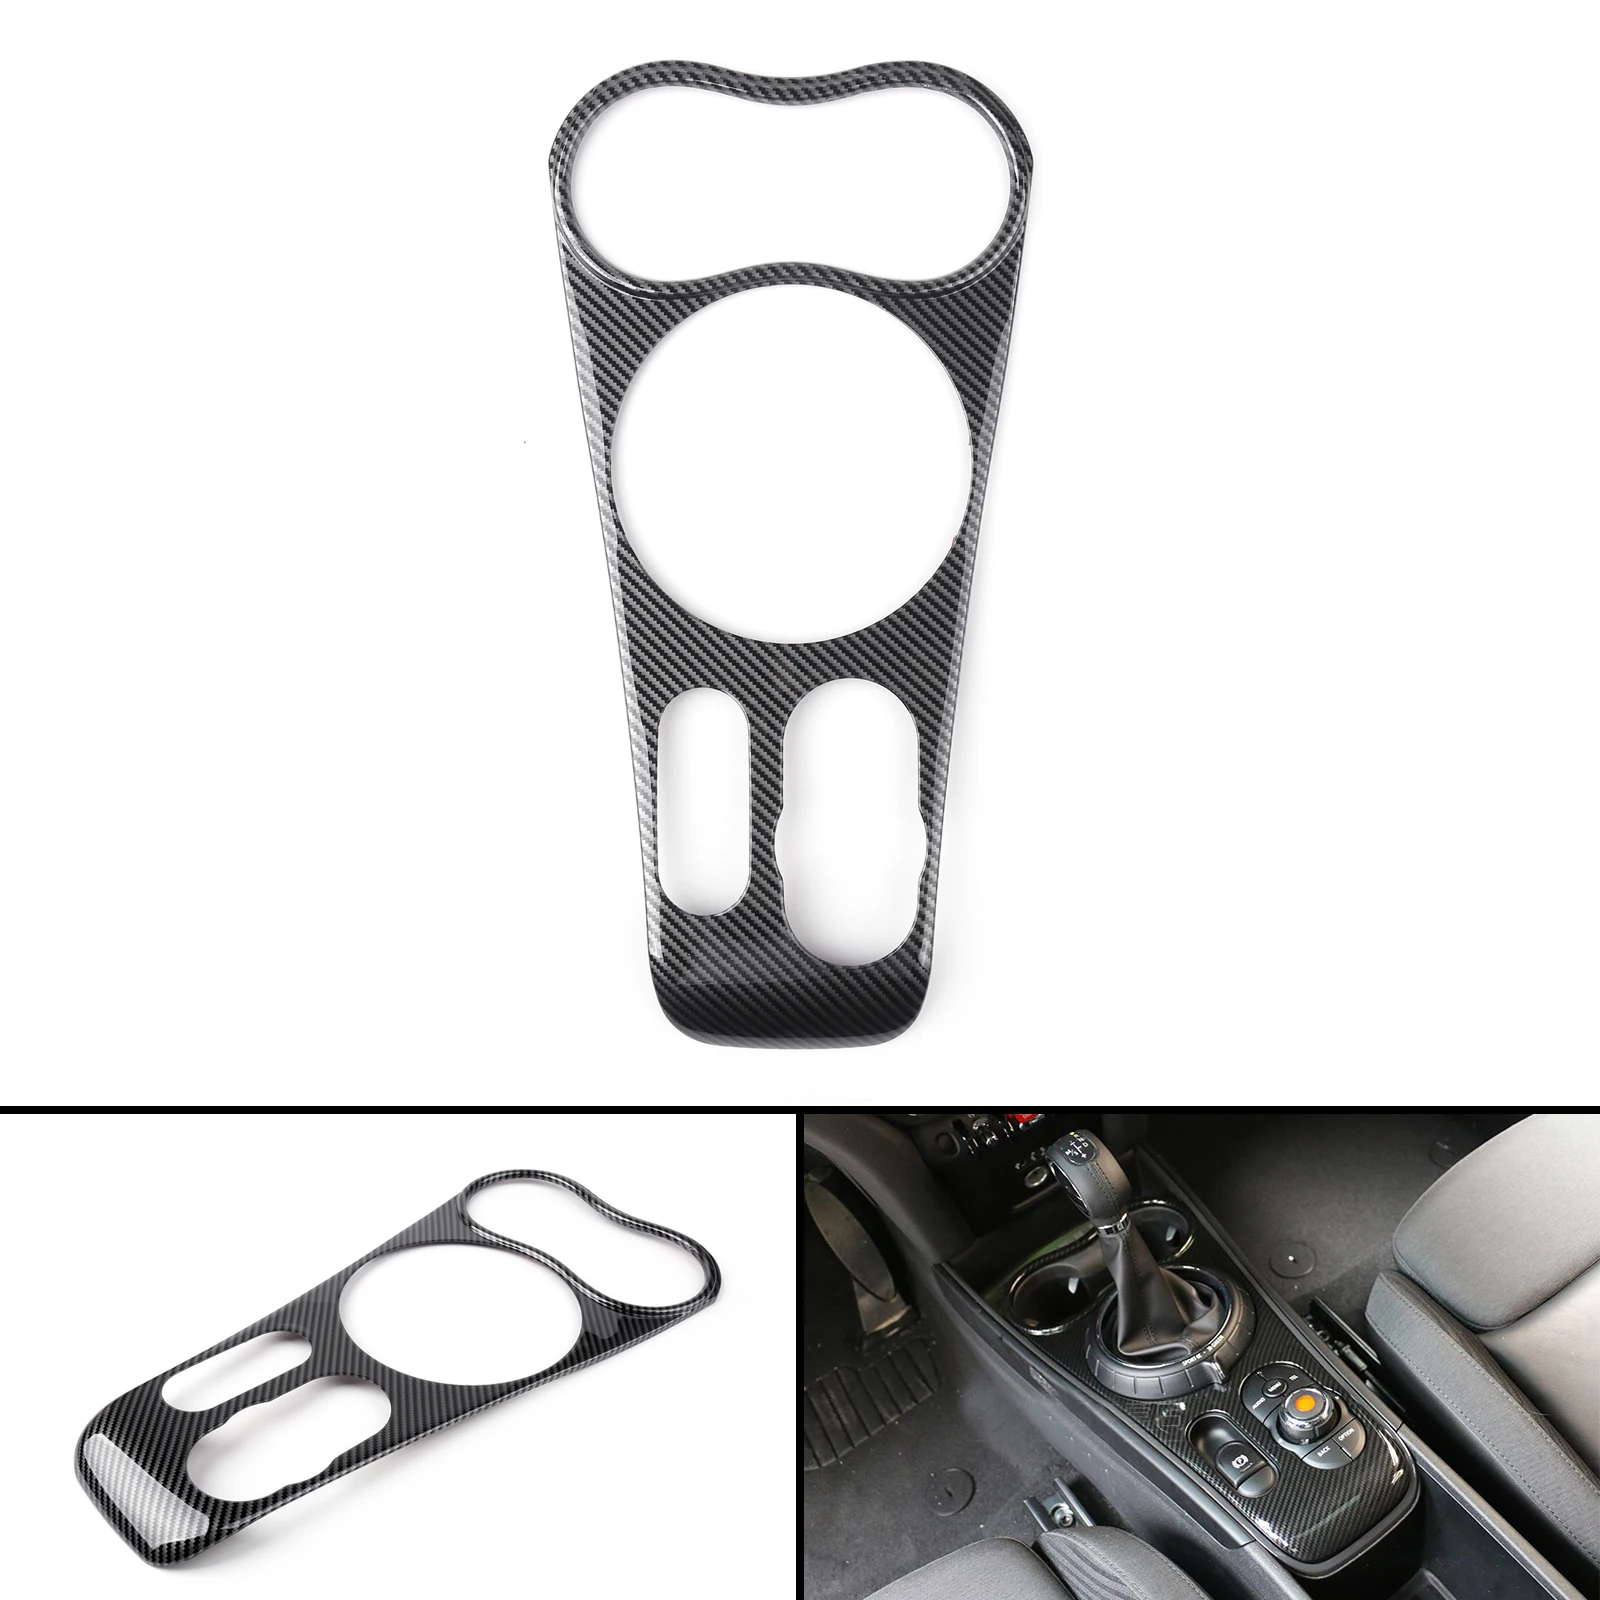 

Areyourshop ABS Central Control Panel Decoration Cover For Mini Cooper Countryman F60 CN, Same as picture show